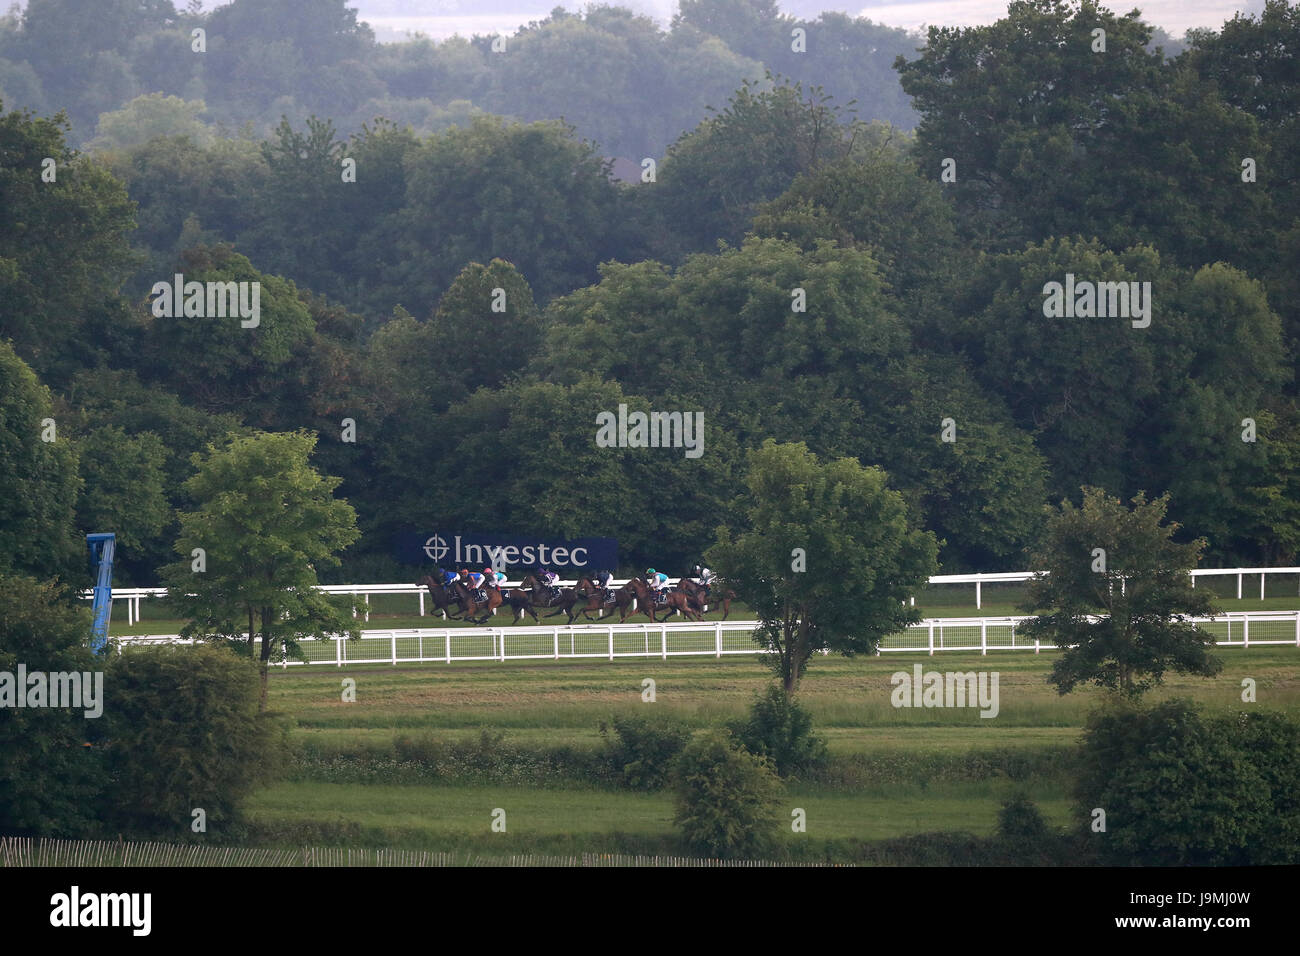 A general view of Runners and riders in the Investec Oaks on Ladies Day during the 2017 Investec Epsom Derby Festival at Epsom Racecourse, Epsom. PRESS ASSOCIATION Photo. Picture date: Friday June 2, 2017. See PA story RACING Epsom. Photo credit should read: John Walton/PA Wire. RESTRICTIONS: any intended commercial use is subject to prior Epsom Downs Racecourse approval. No Private Sales. Call +44 (0)1158 447447 for further information Stock Photo